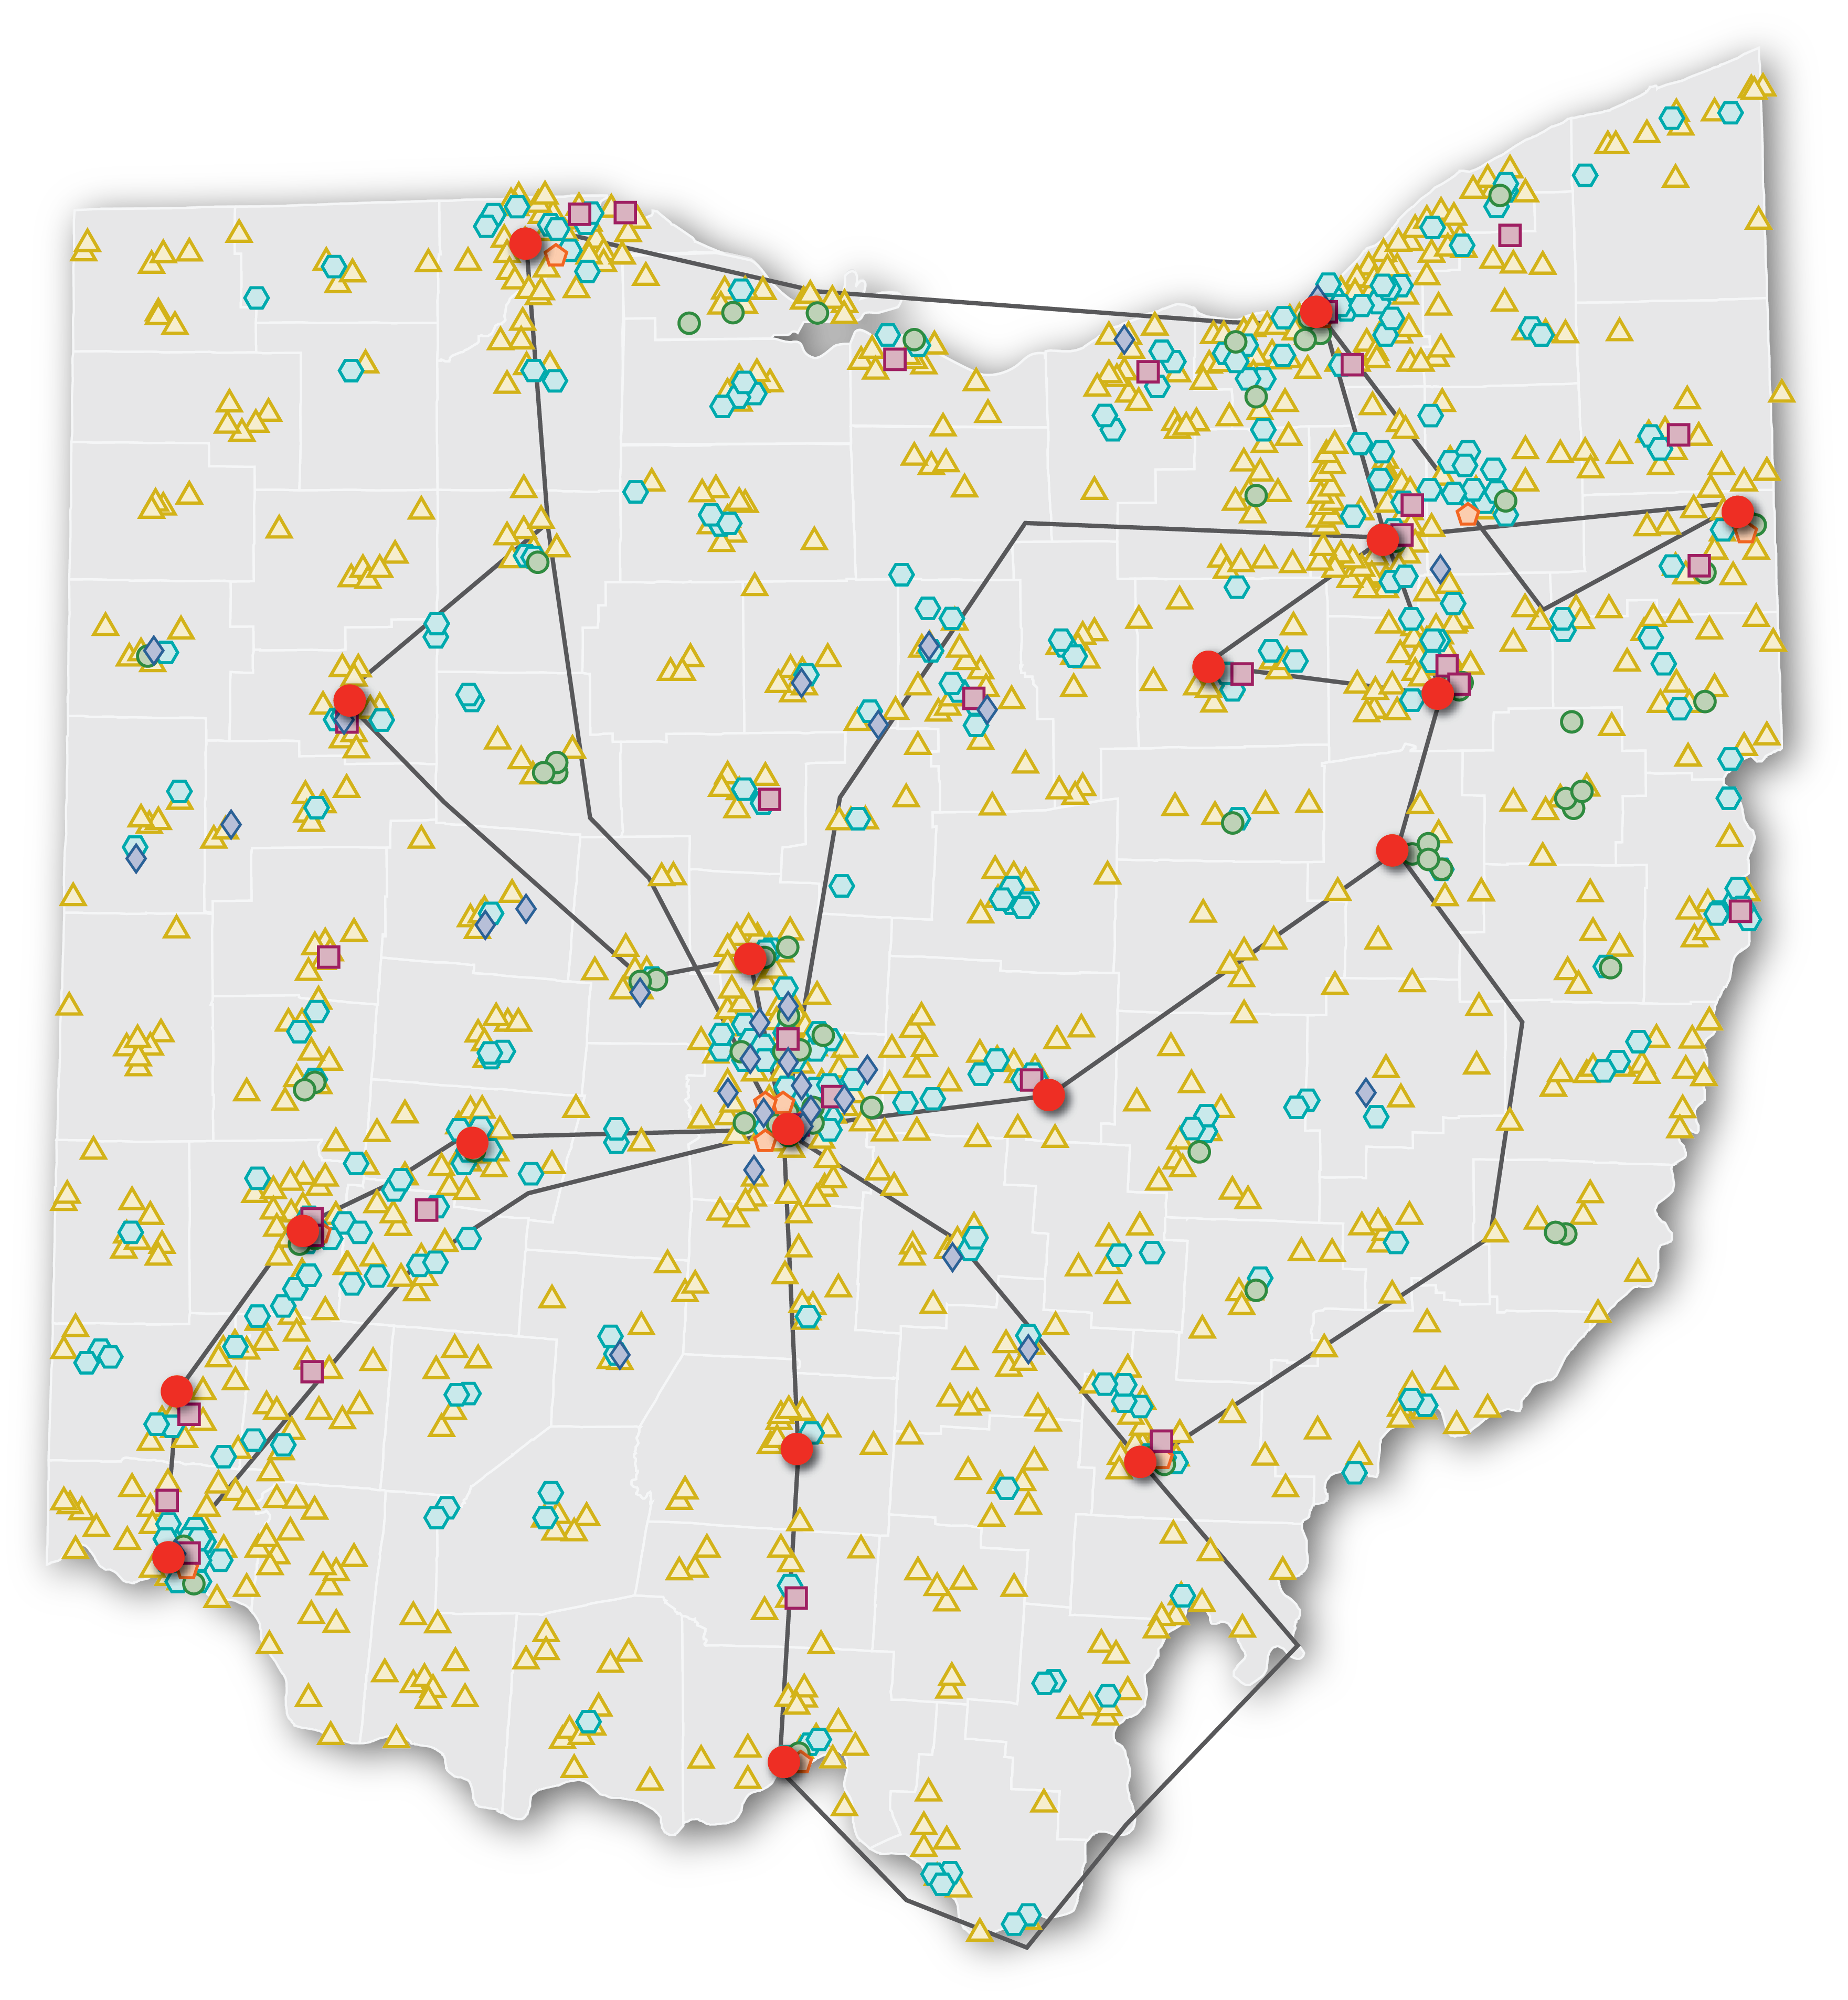 Graphic Map: Ohio outline in gray. OARnet backbone in red lines connecting PoPs in major cities. Community partners identified by colored circles throughout state.